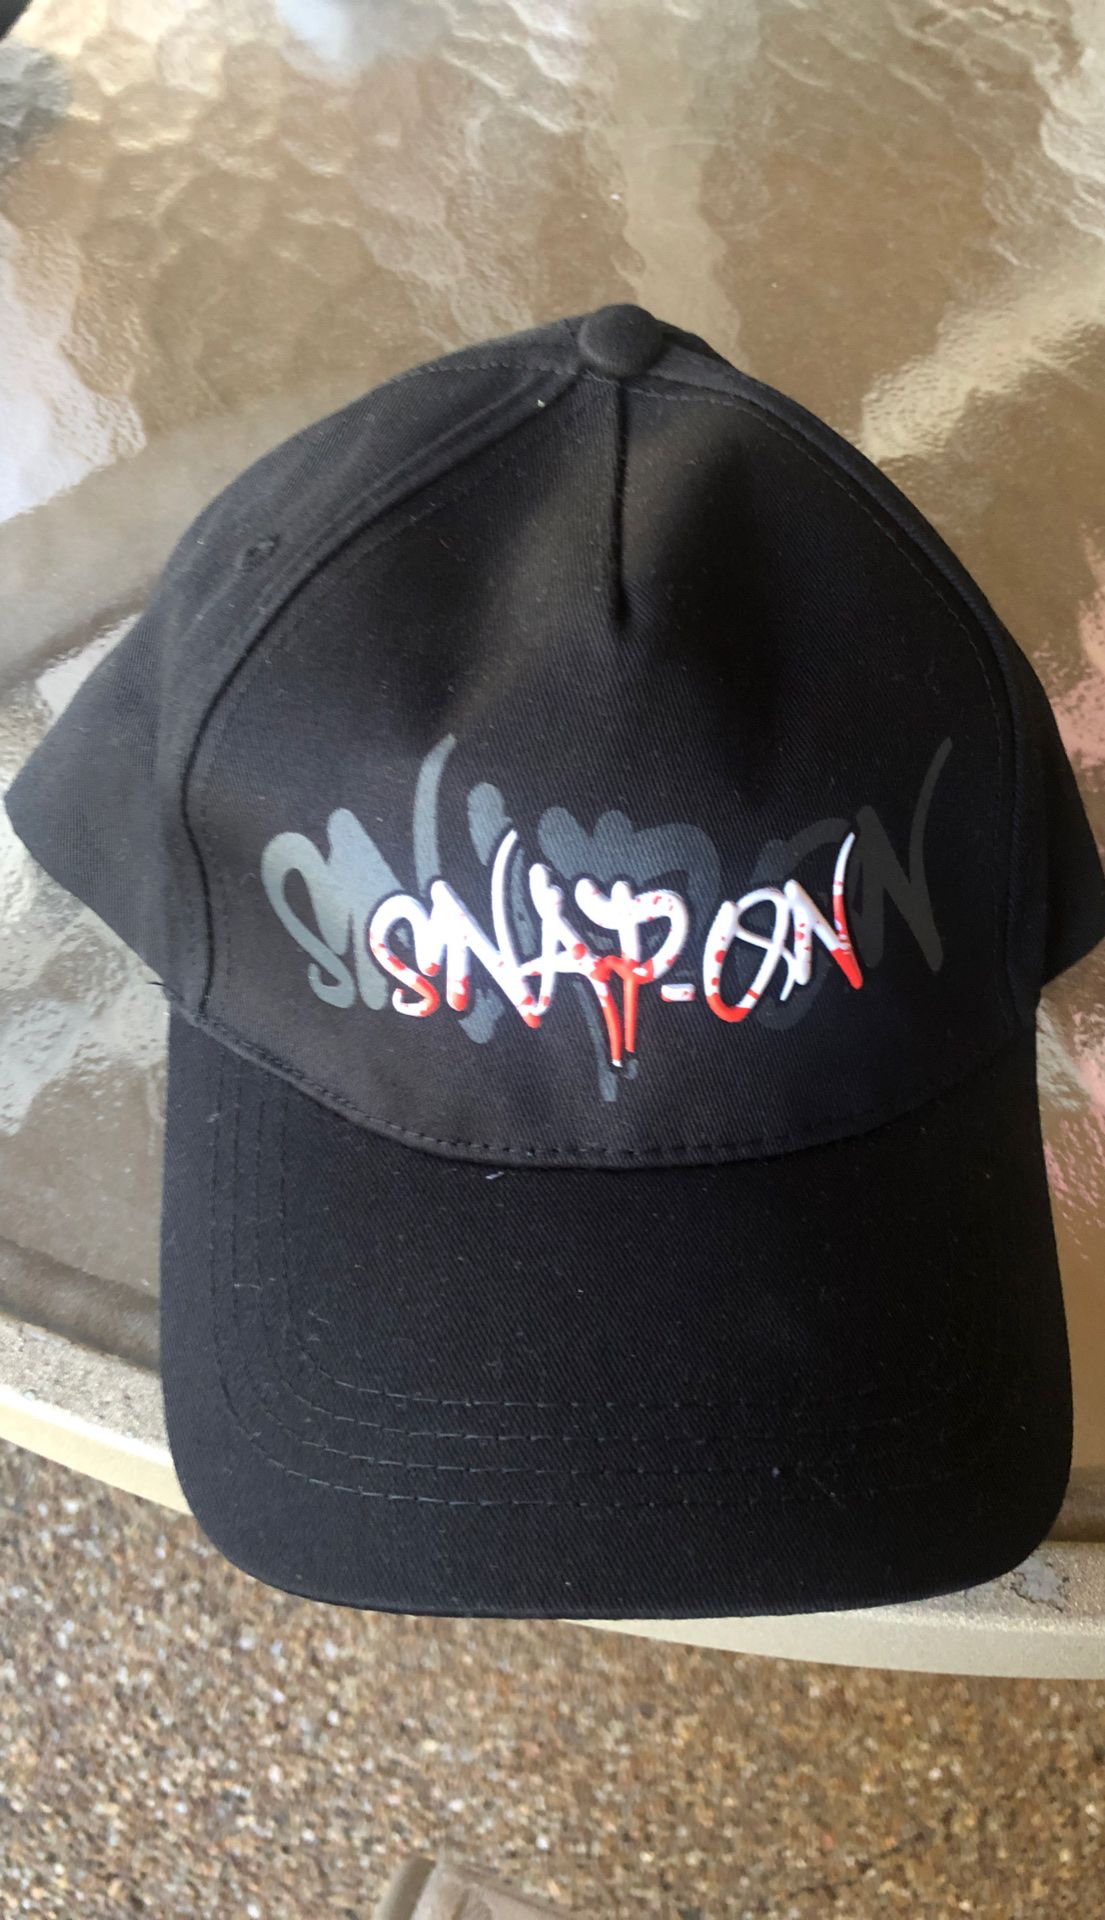 Official Snap-On Tools Cap